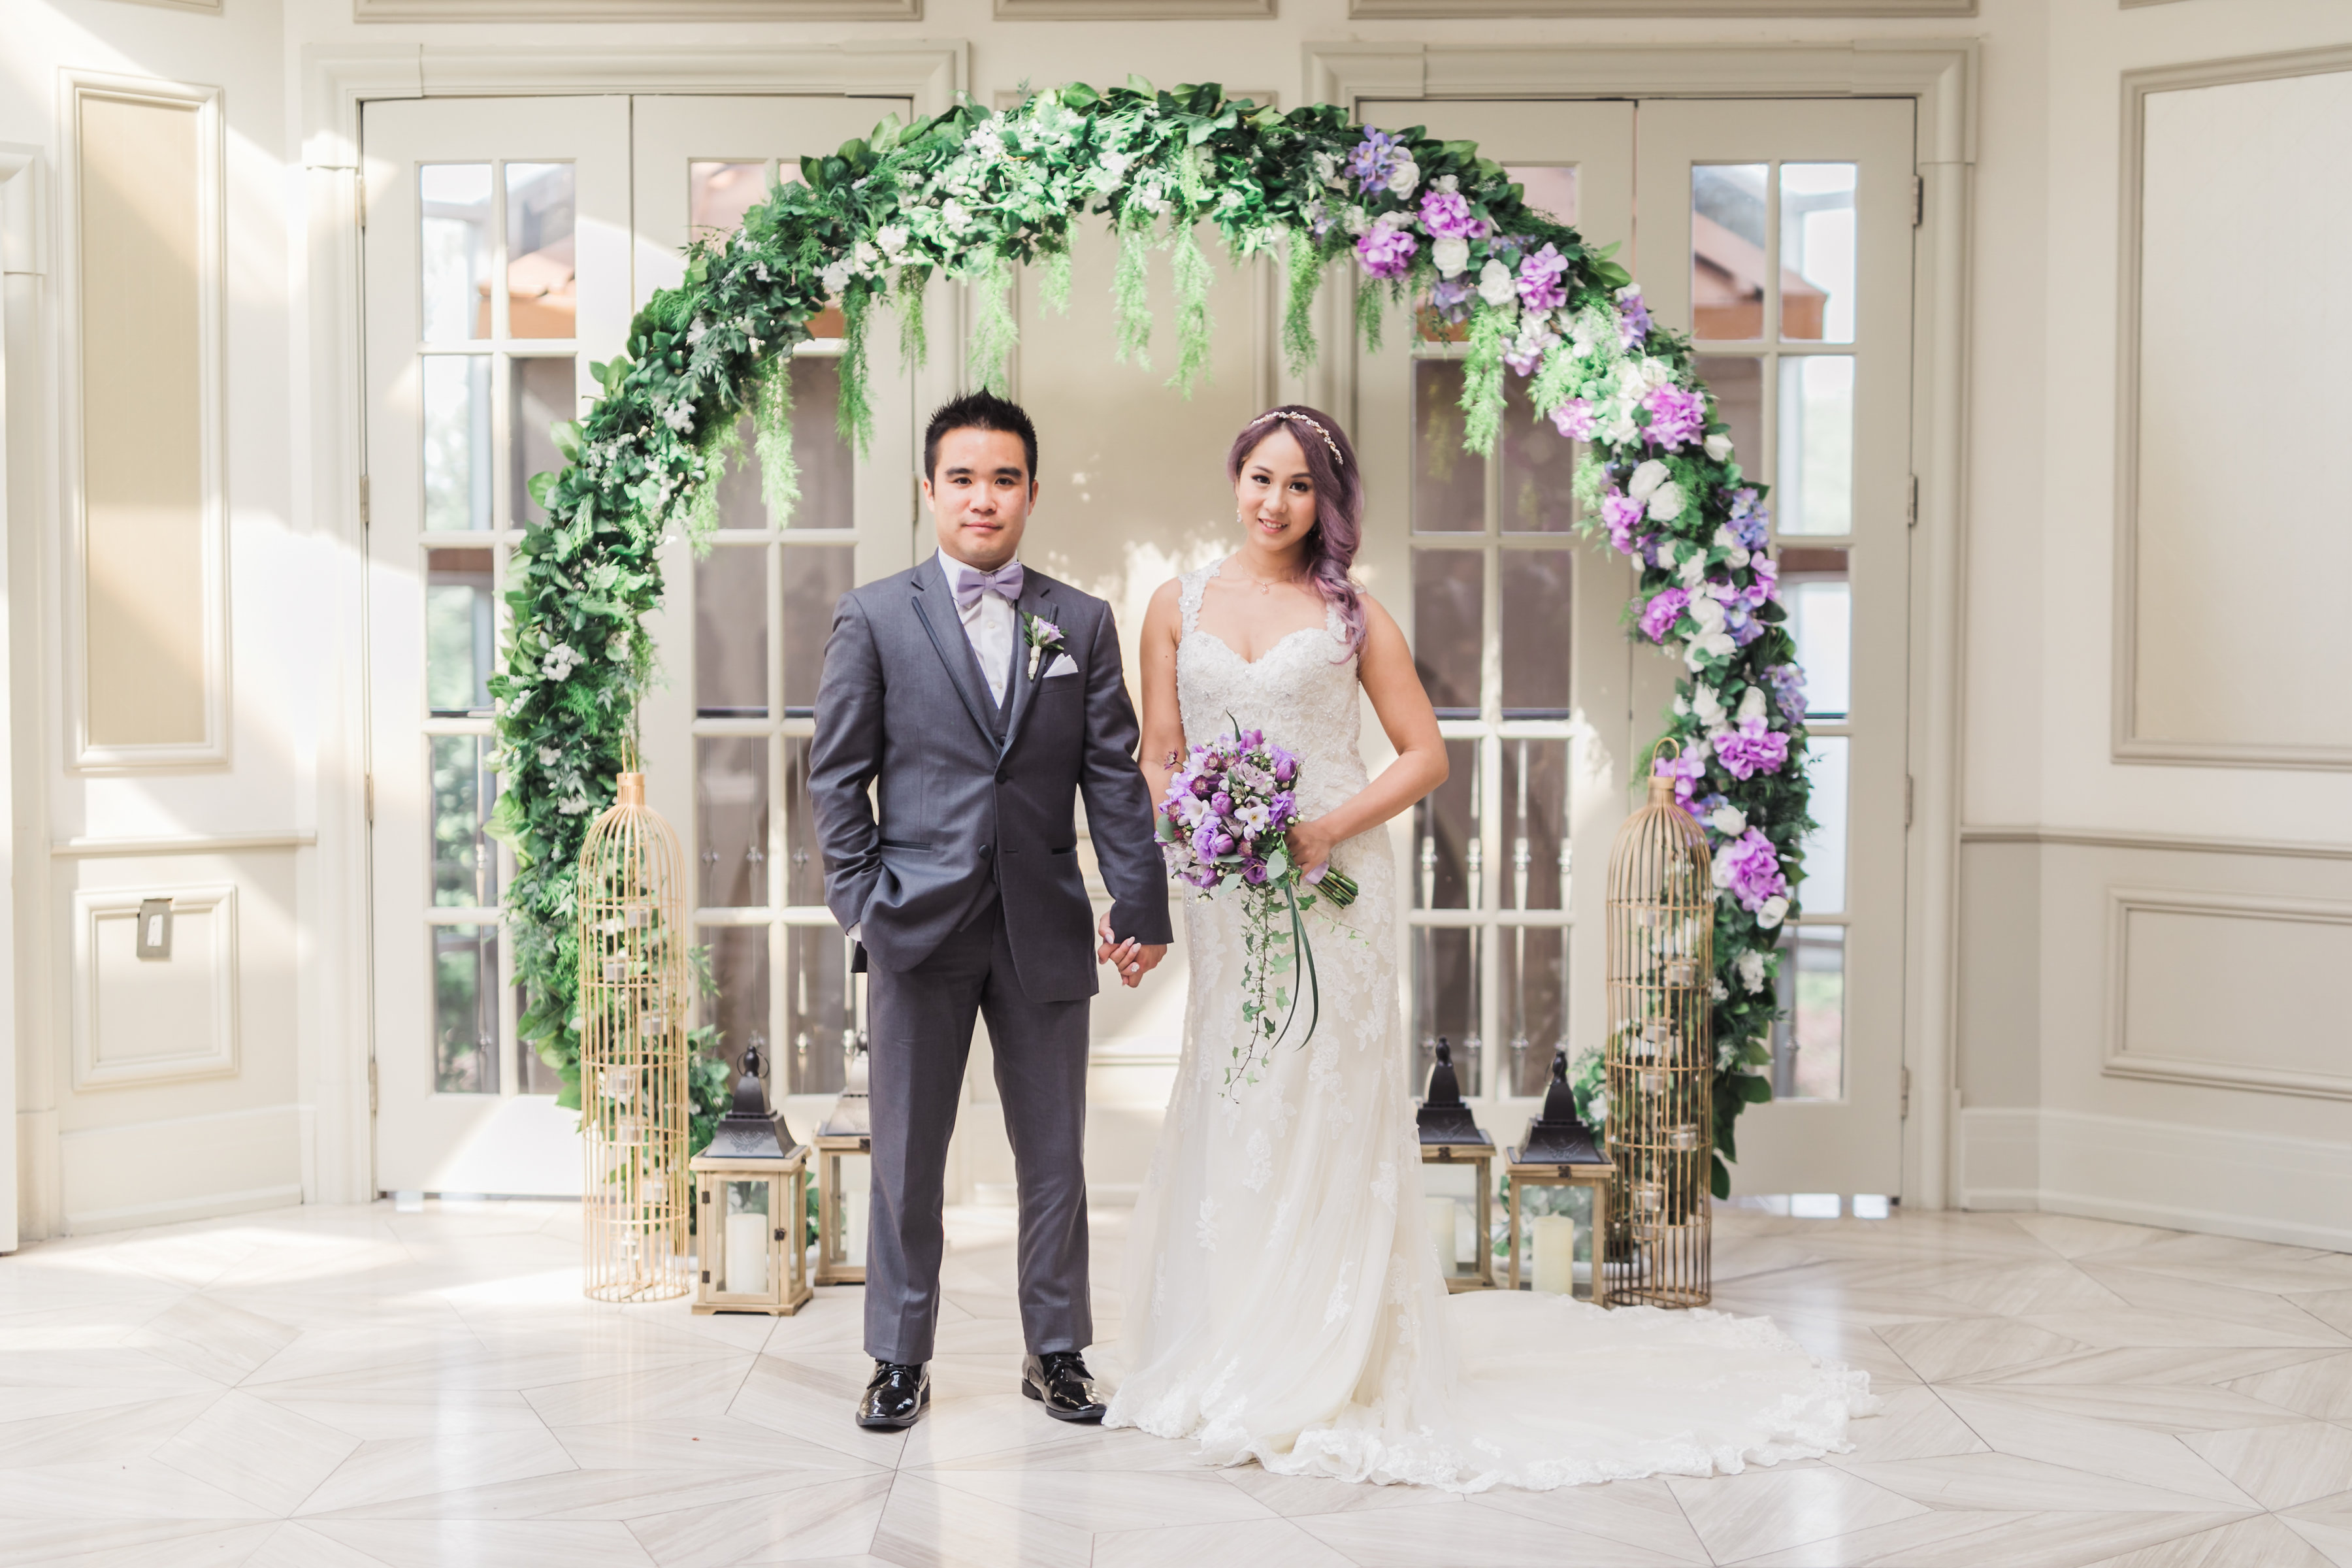 Wedding ceremony circular arch (Circle of Love), with cream and purple roses, hydrangea, and greenery. Toronto wedding flowers and decor at Fontana Primavera by Secrets Floral.